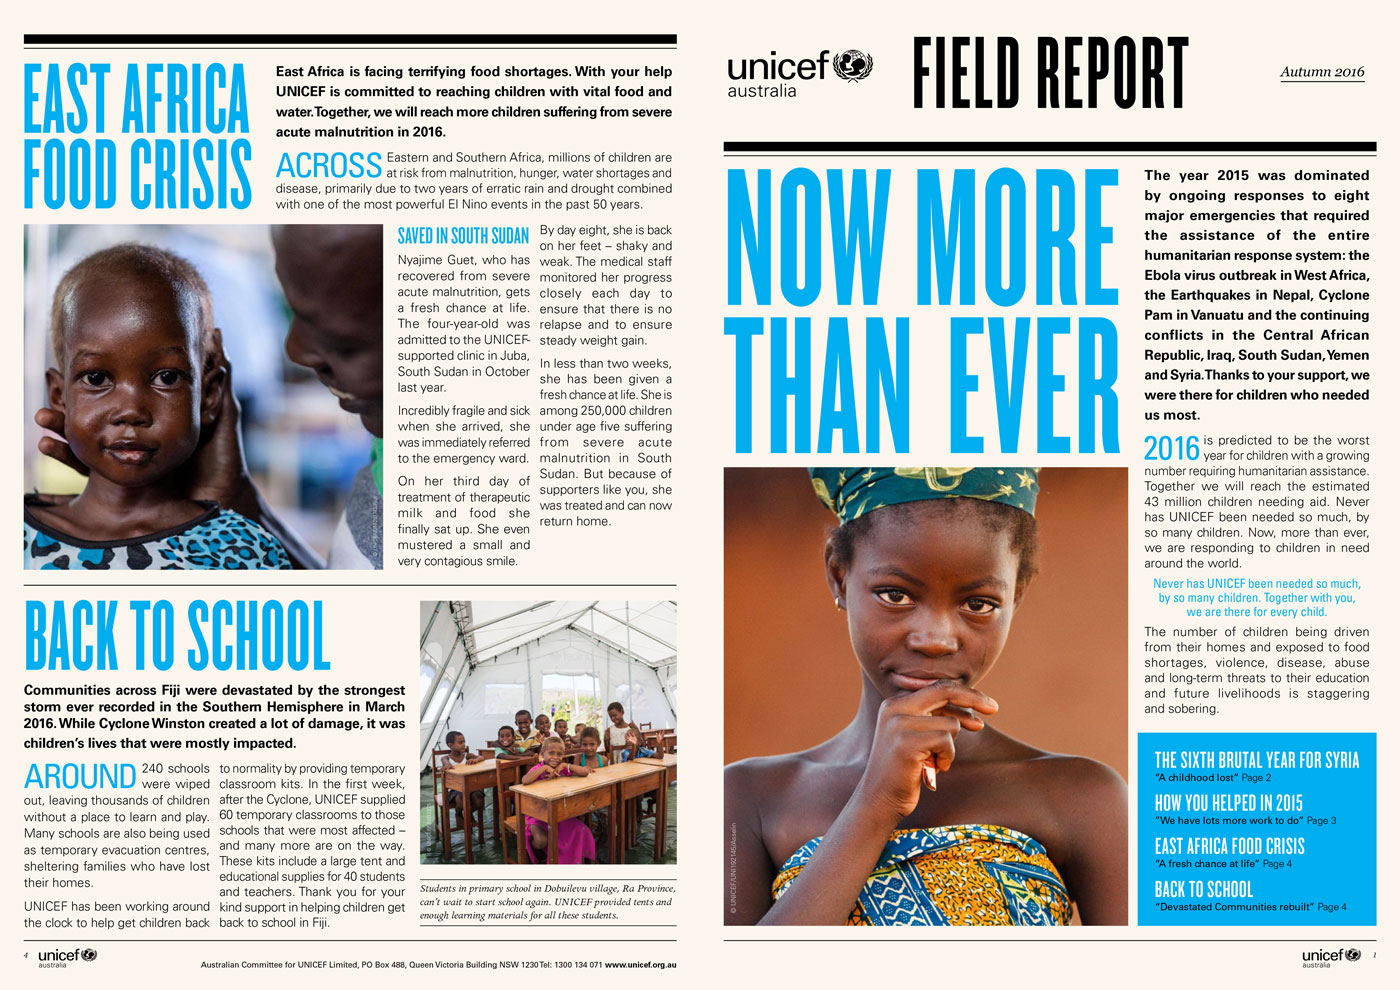 Image of a regularly published UNICEF publication called the Field Report.